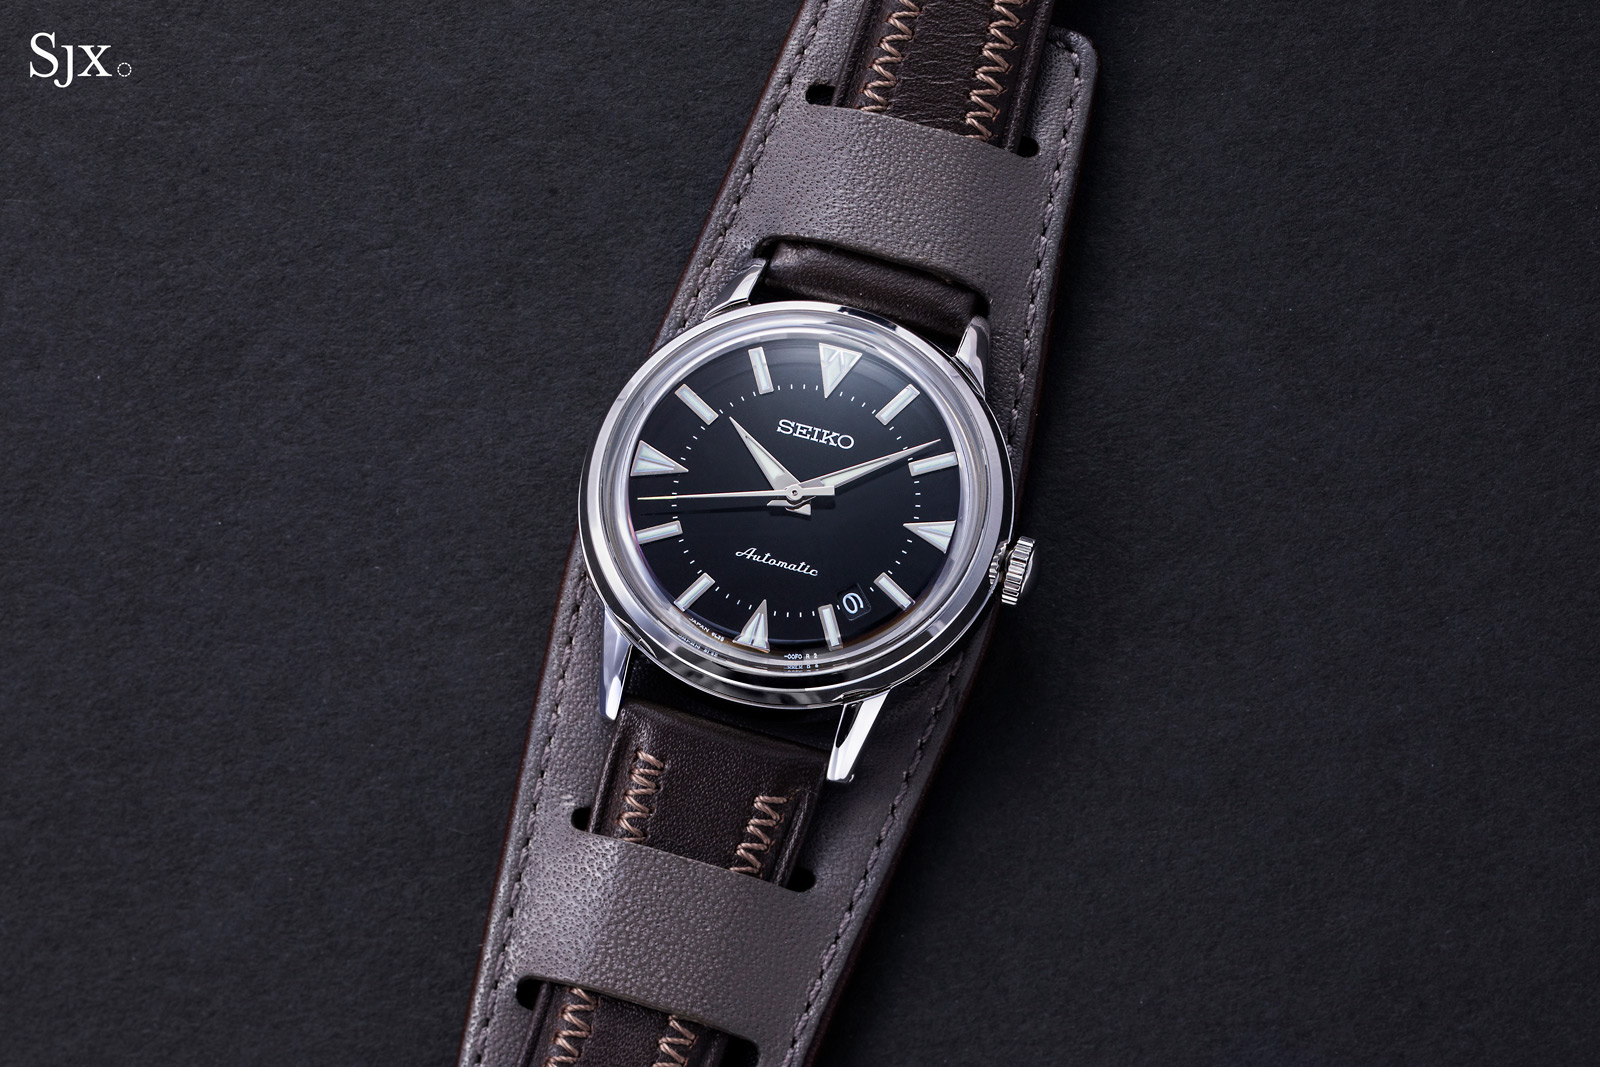 Introducing: The Seiko Prospex 'The 1959 Alpinist Modern Re